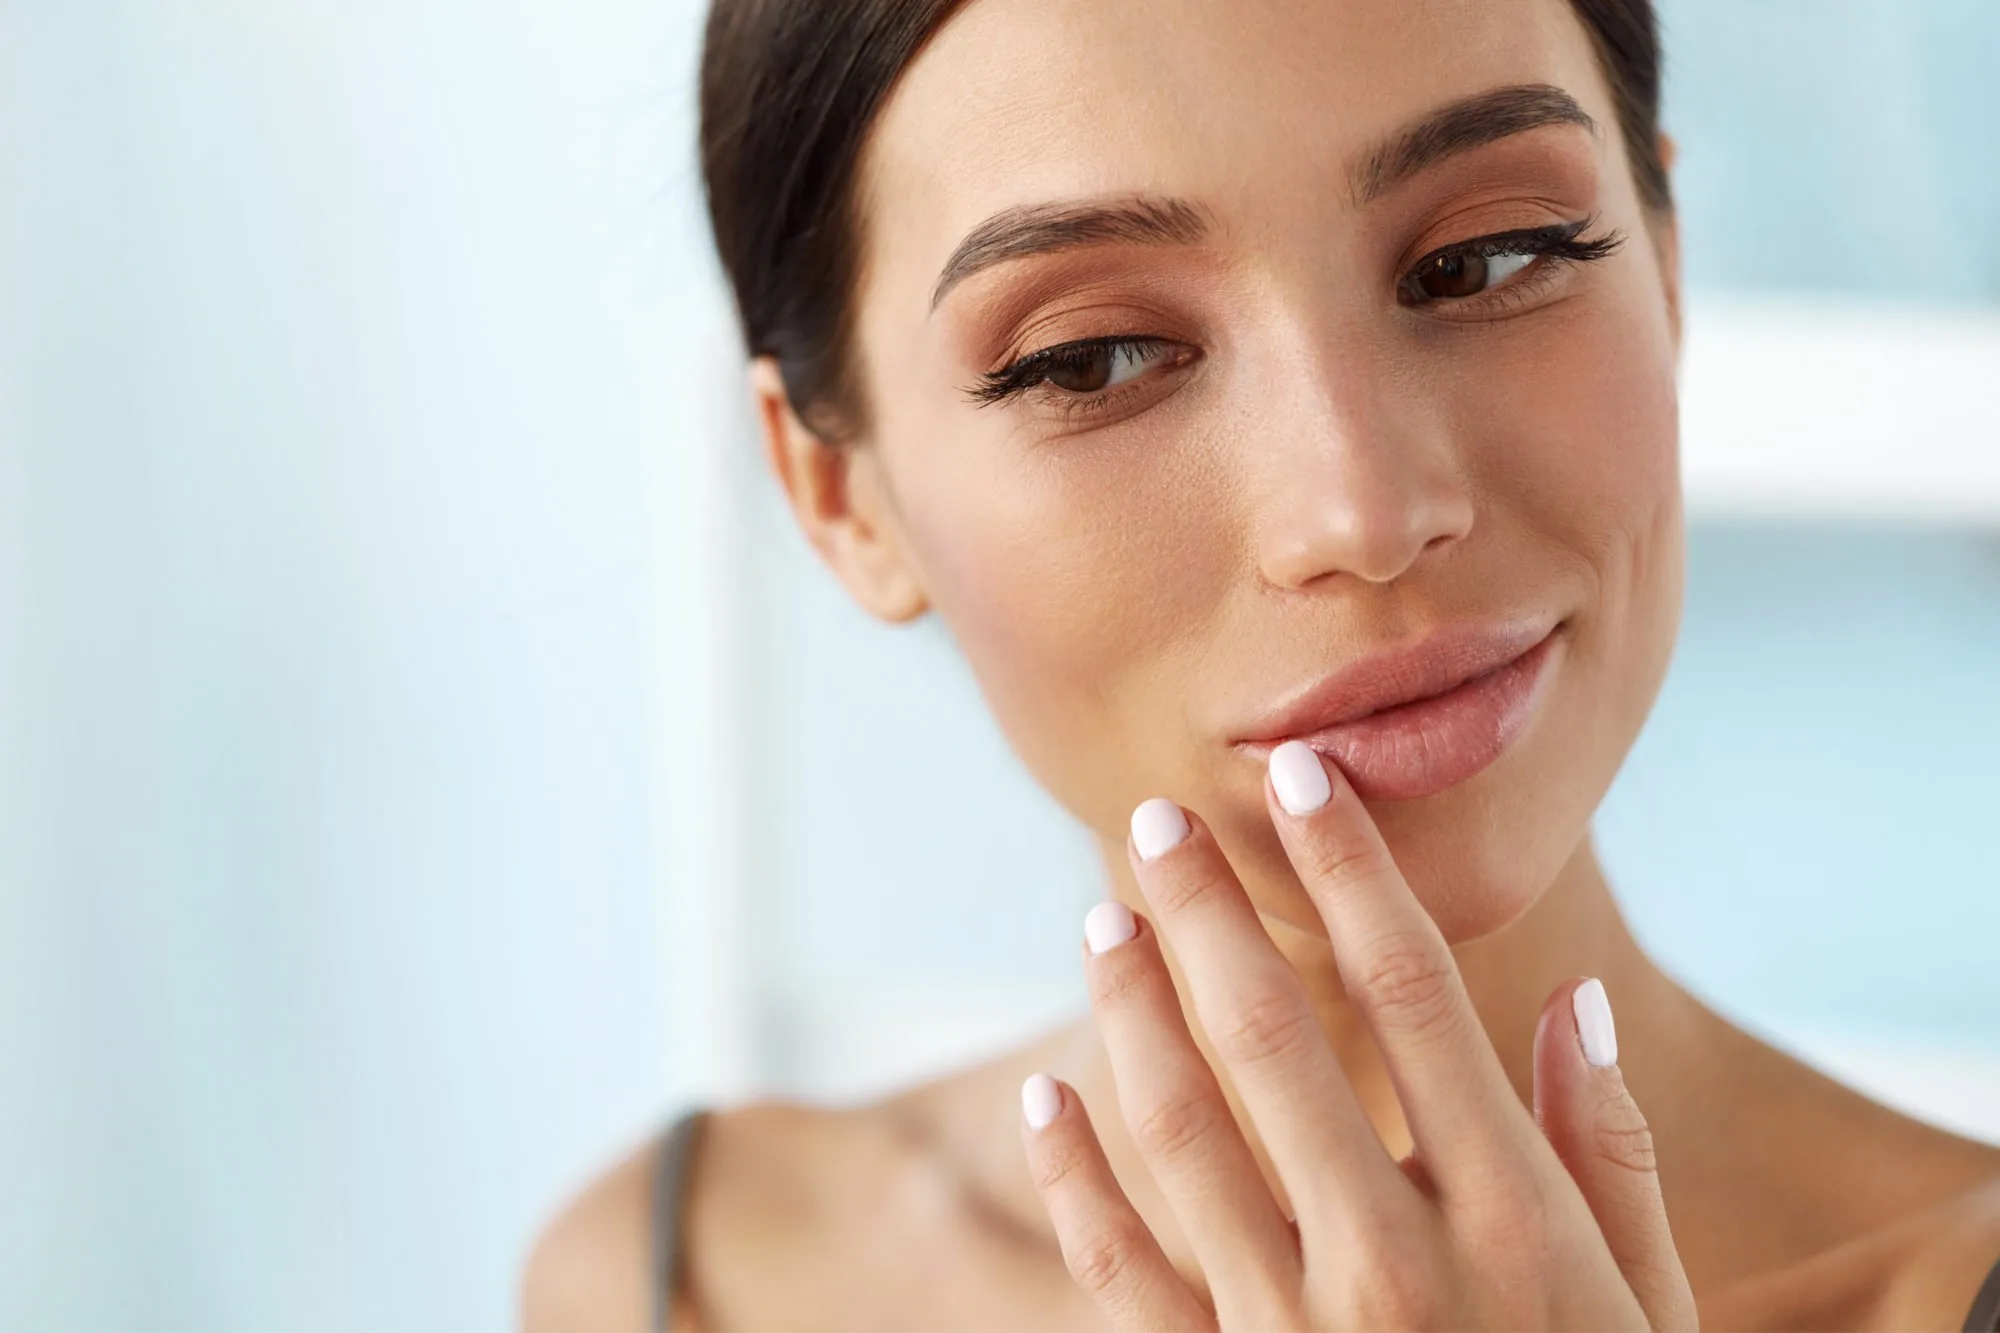 The Eight Simple Rules of Lip and Hand Care